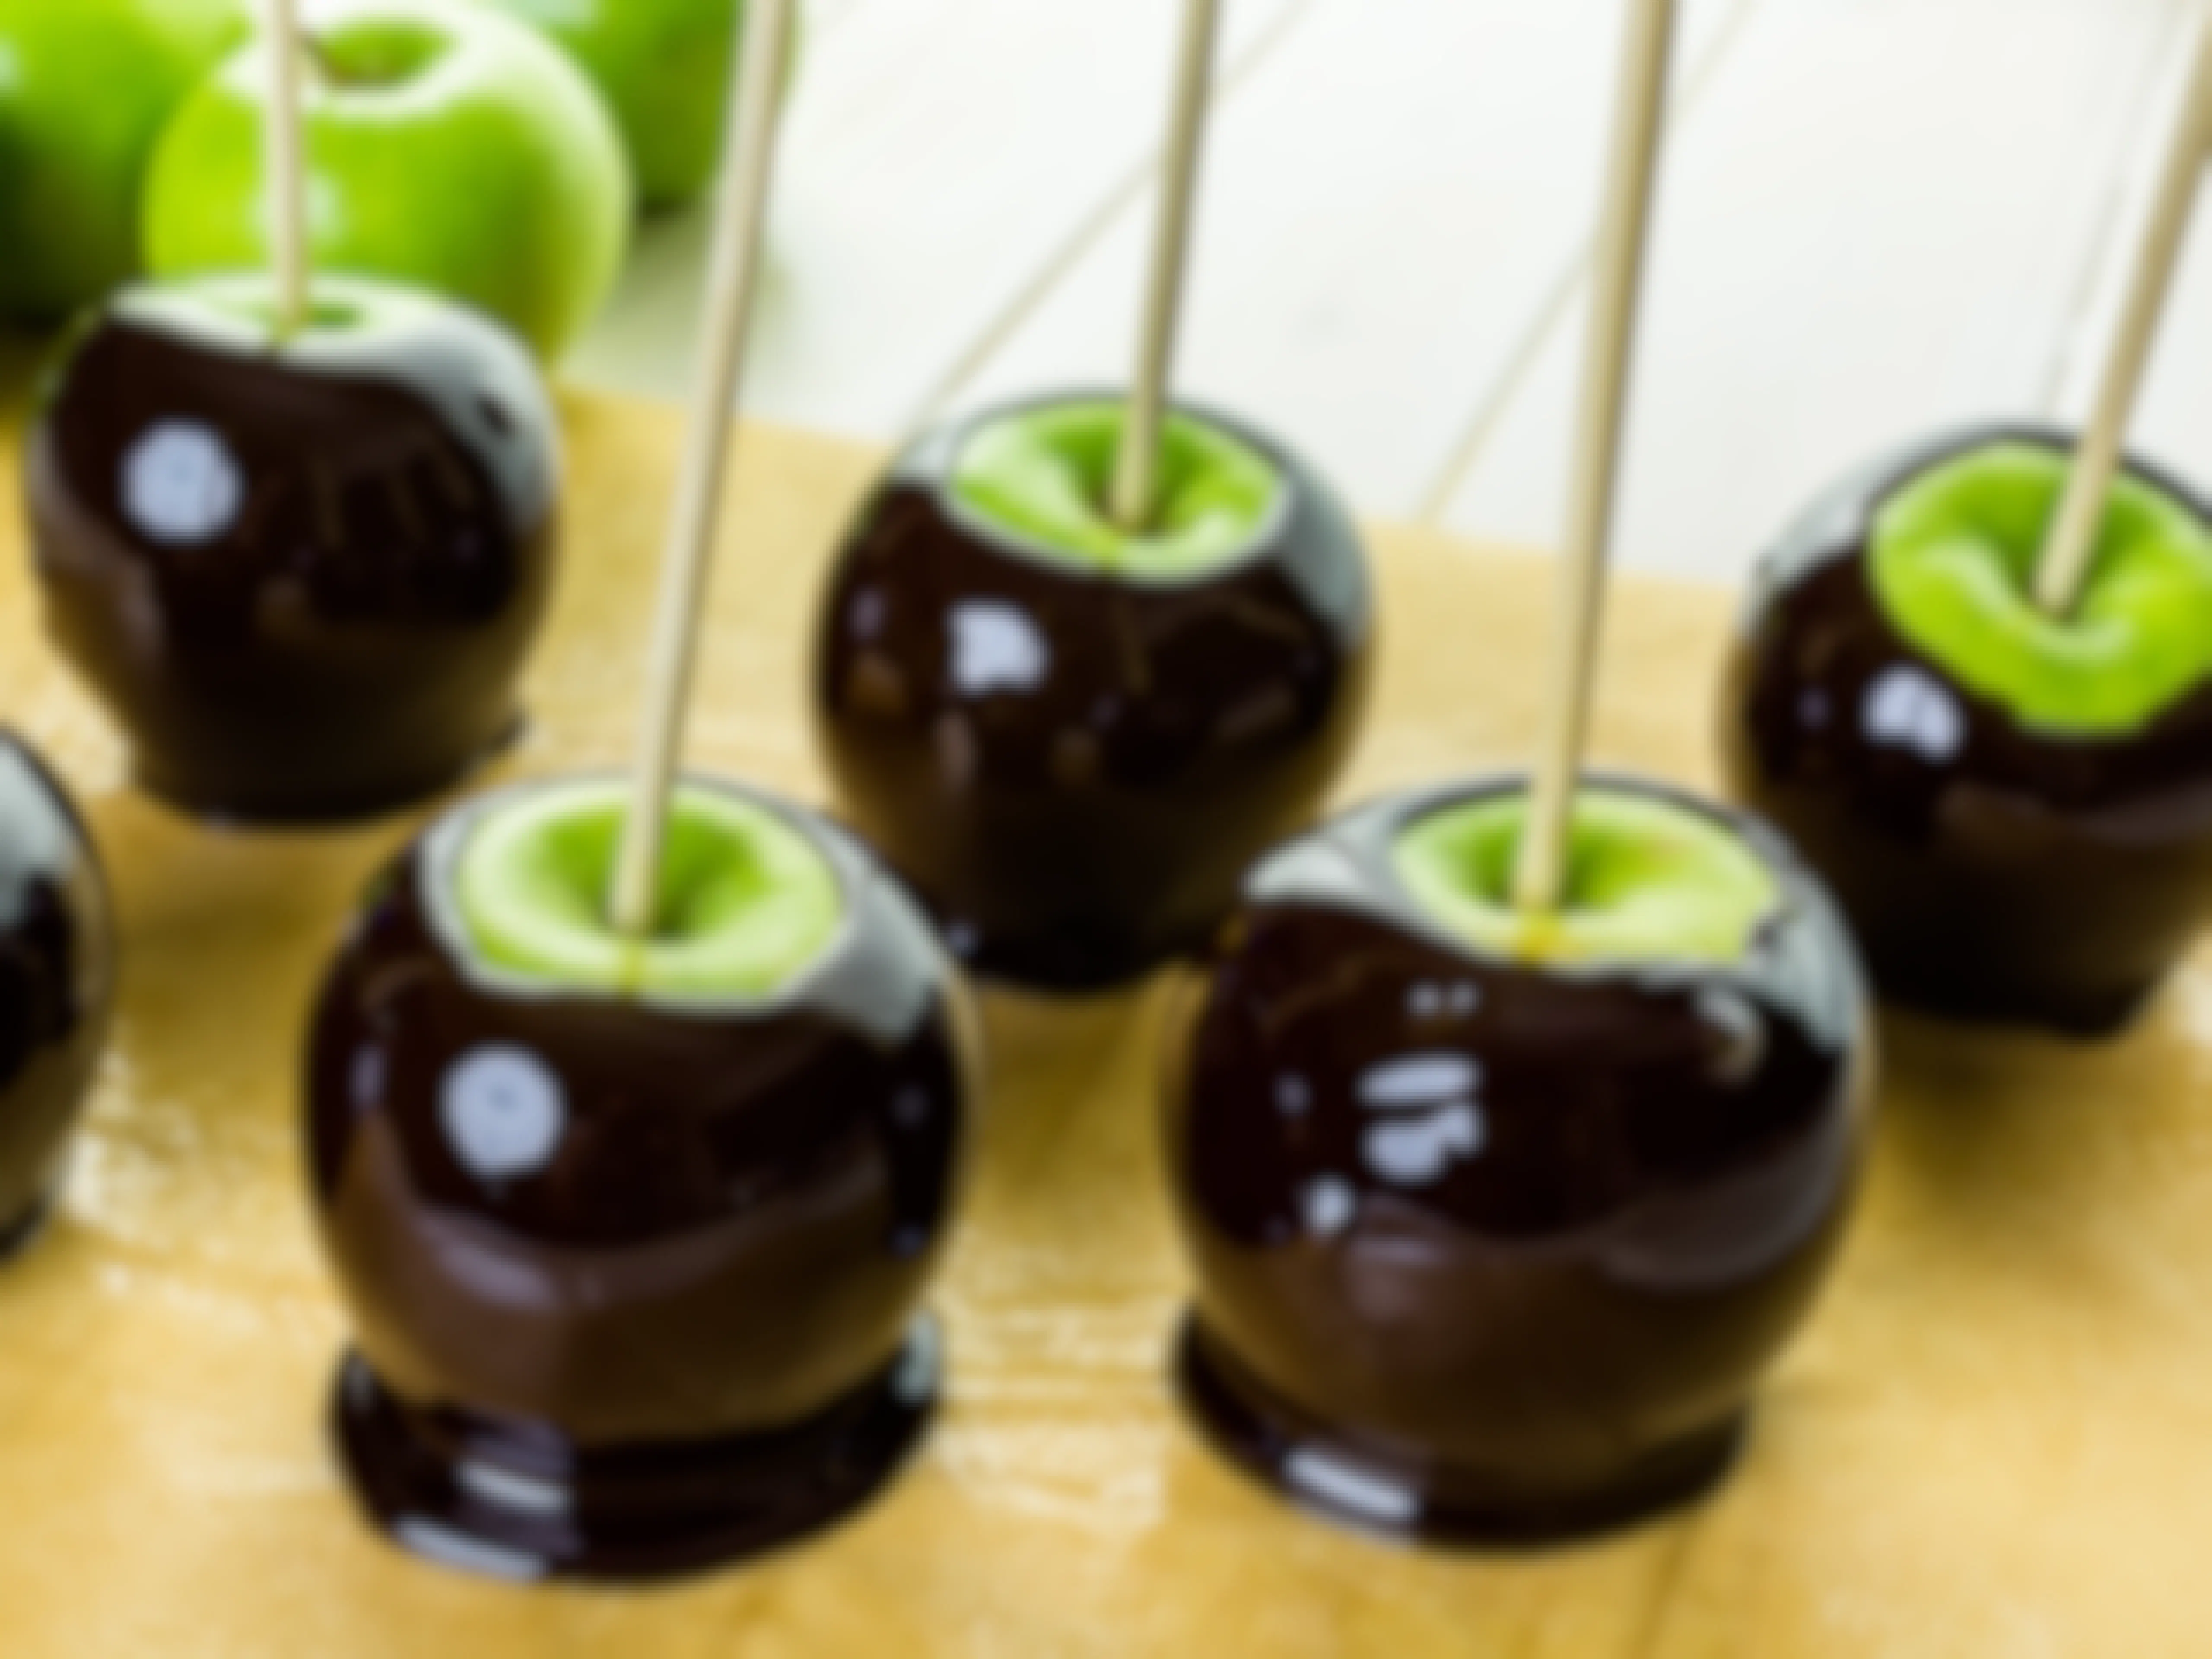 Apples dipped in black toffee candy with bamboo skewers sticking out of them, sitting on a counter.